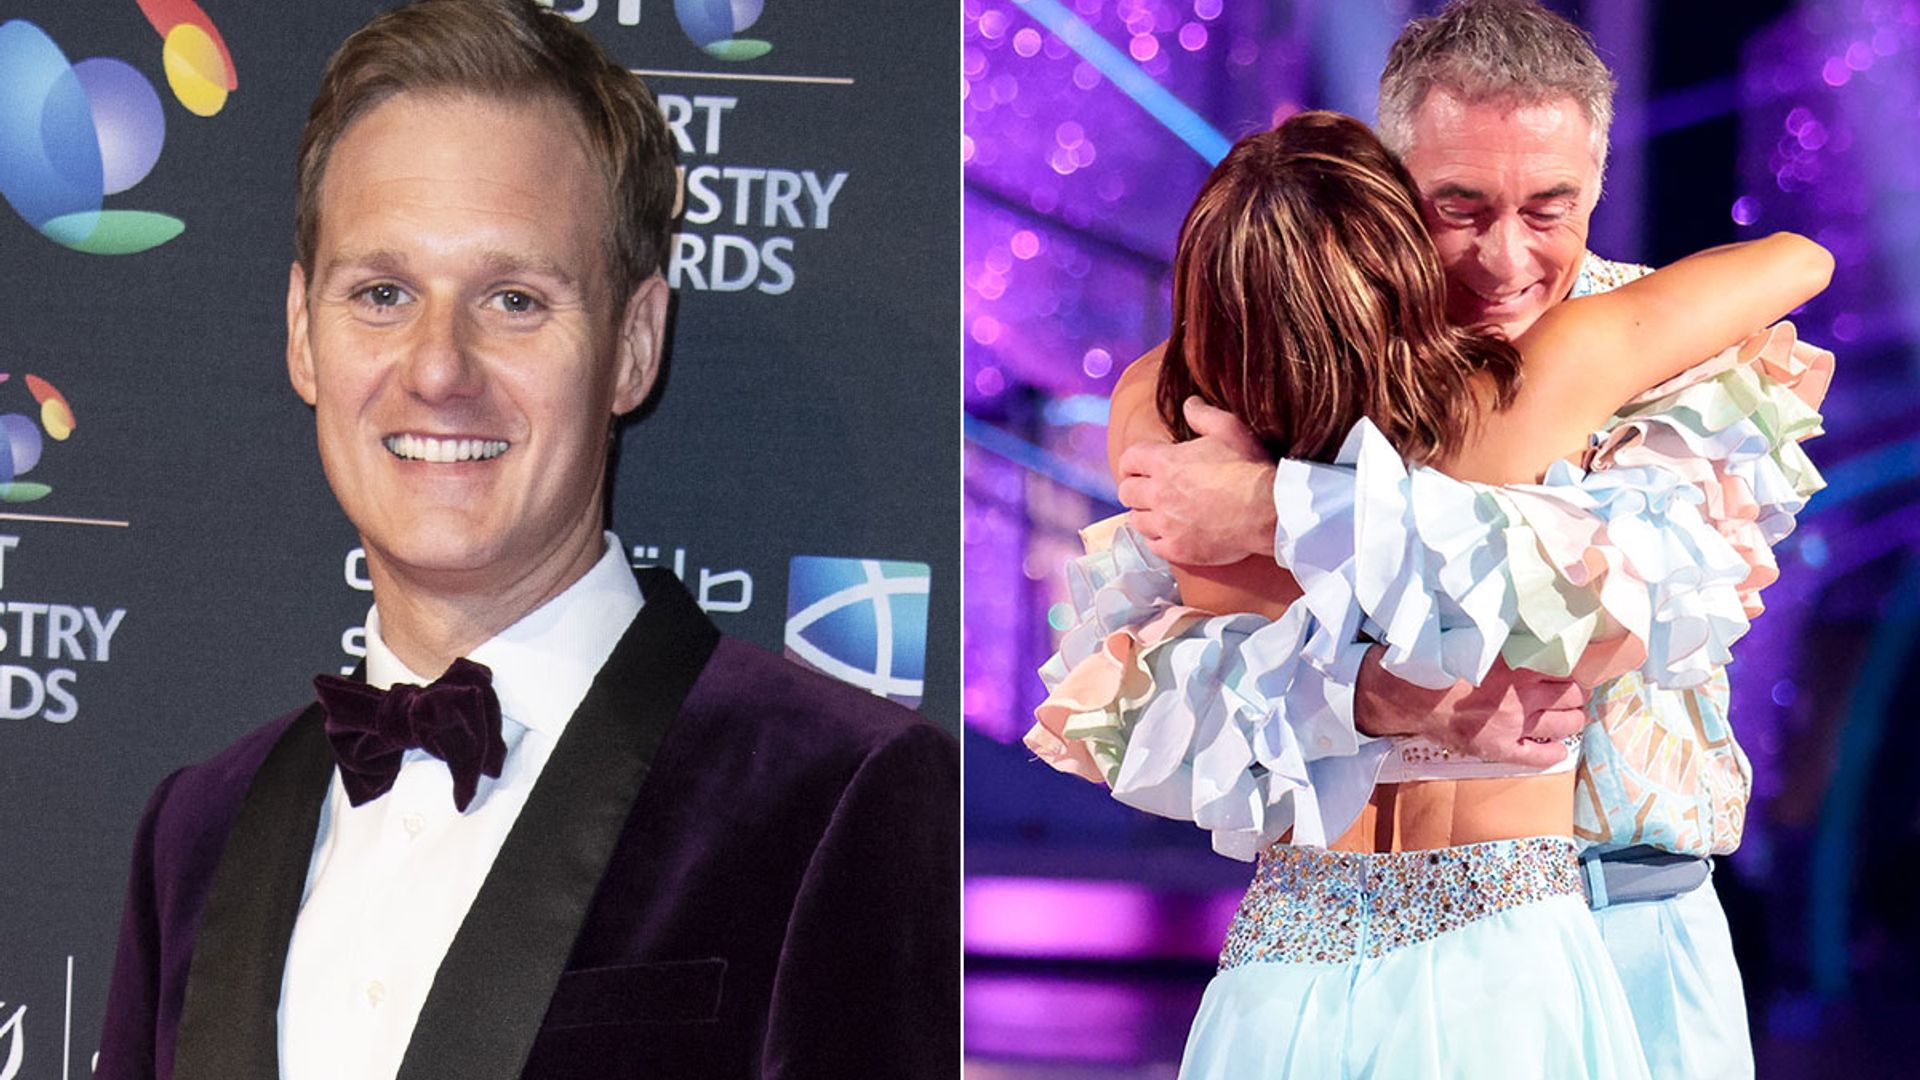 BBC Breakfast's Dan Walker 'sad' after latest Strictly Come Dancing exit